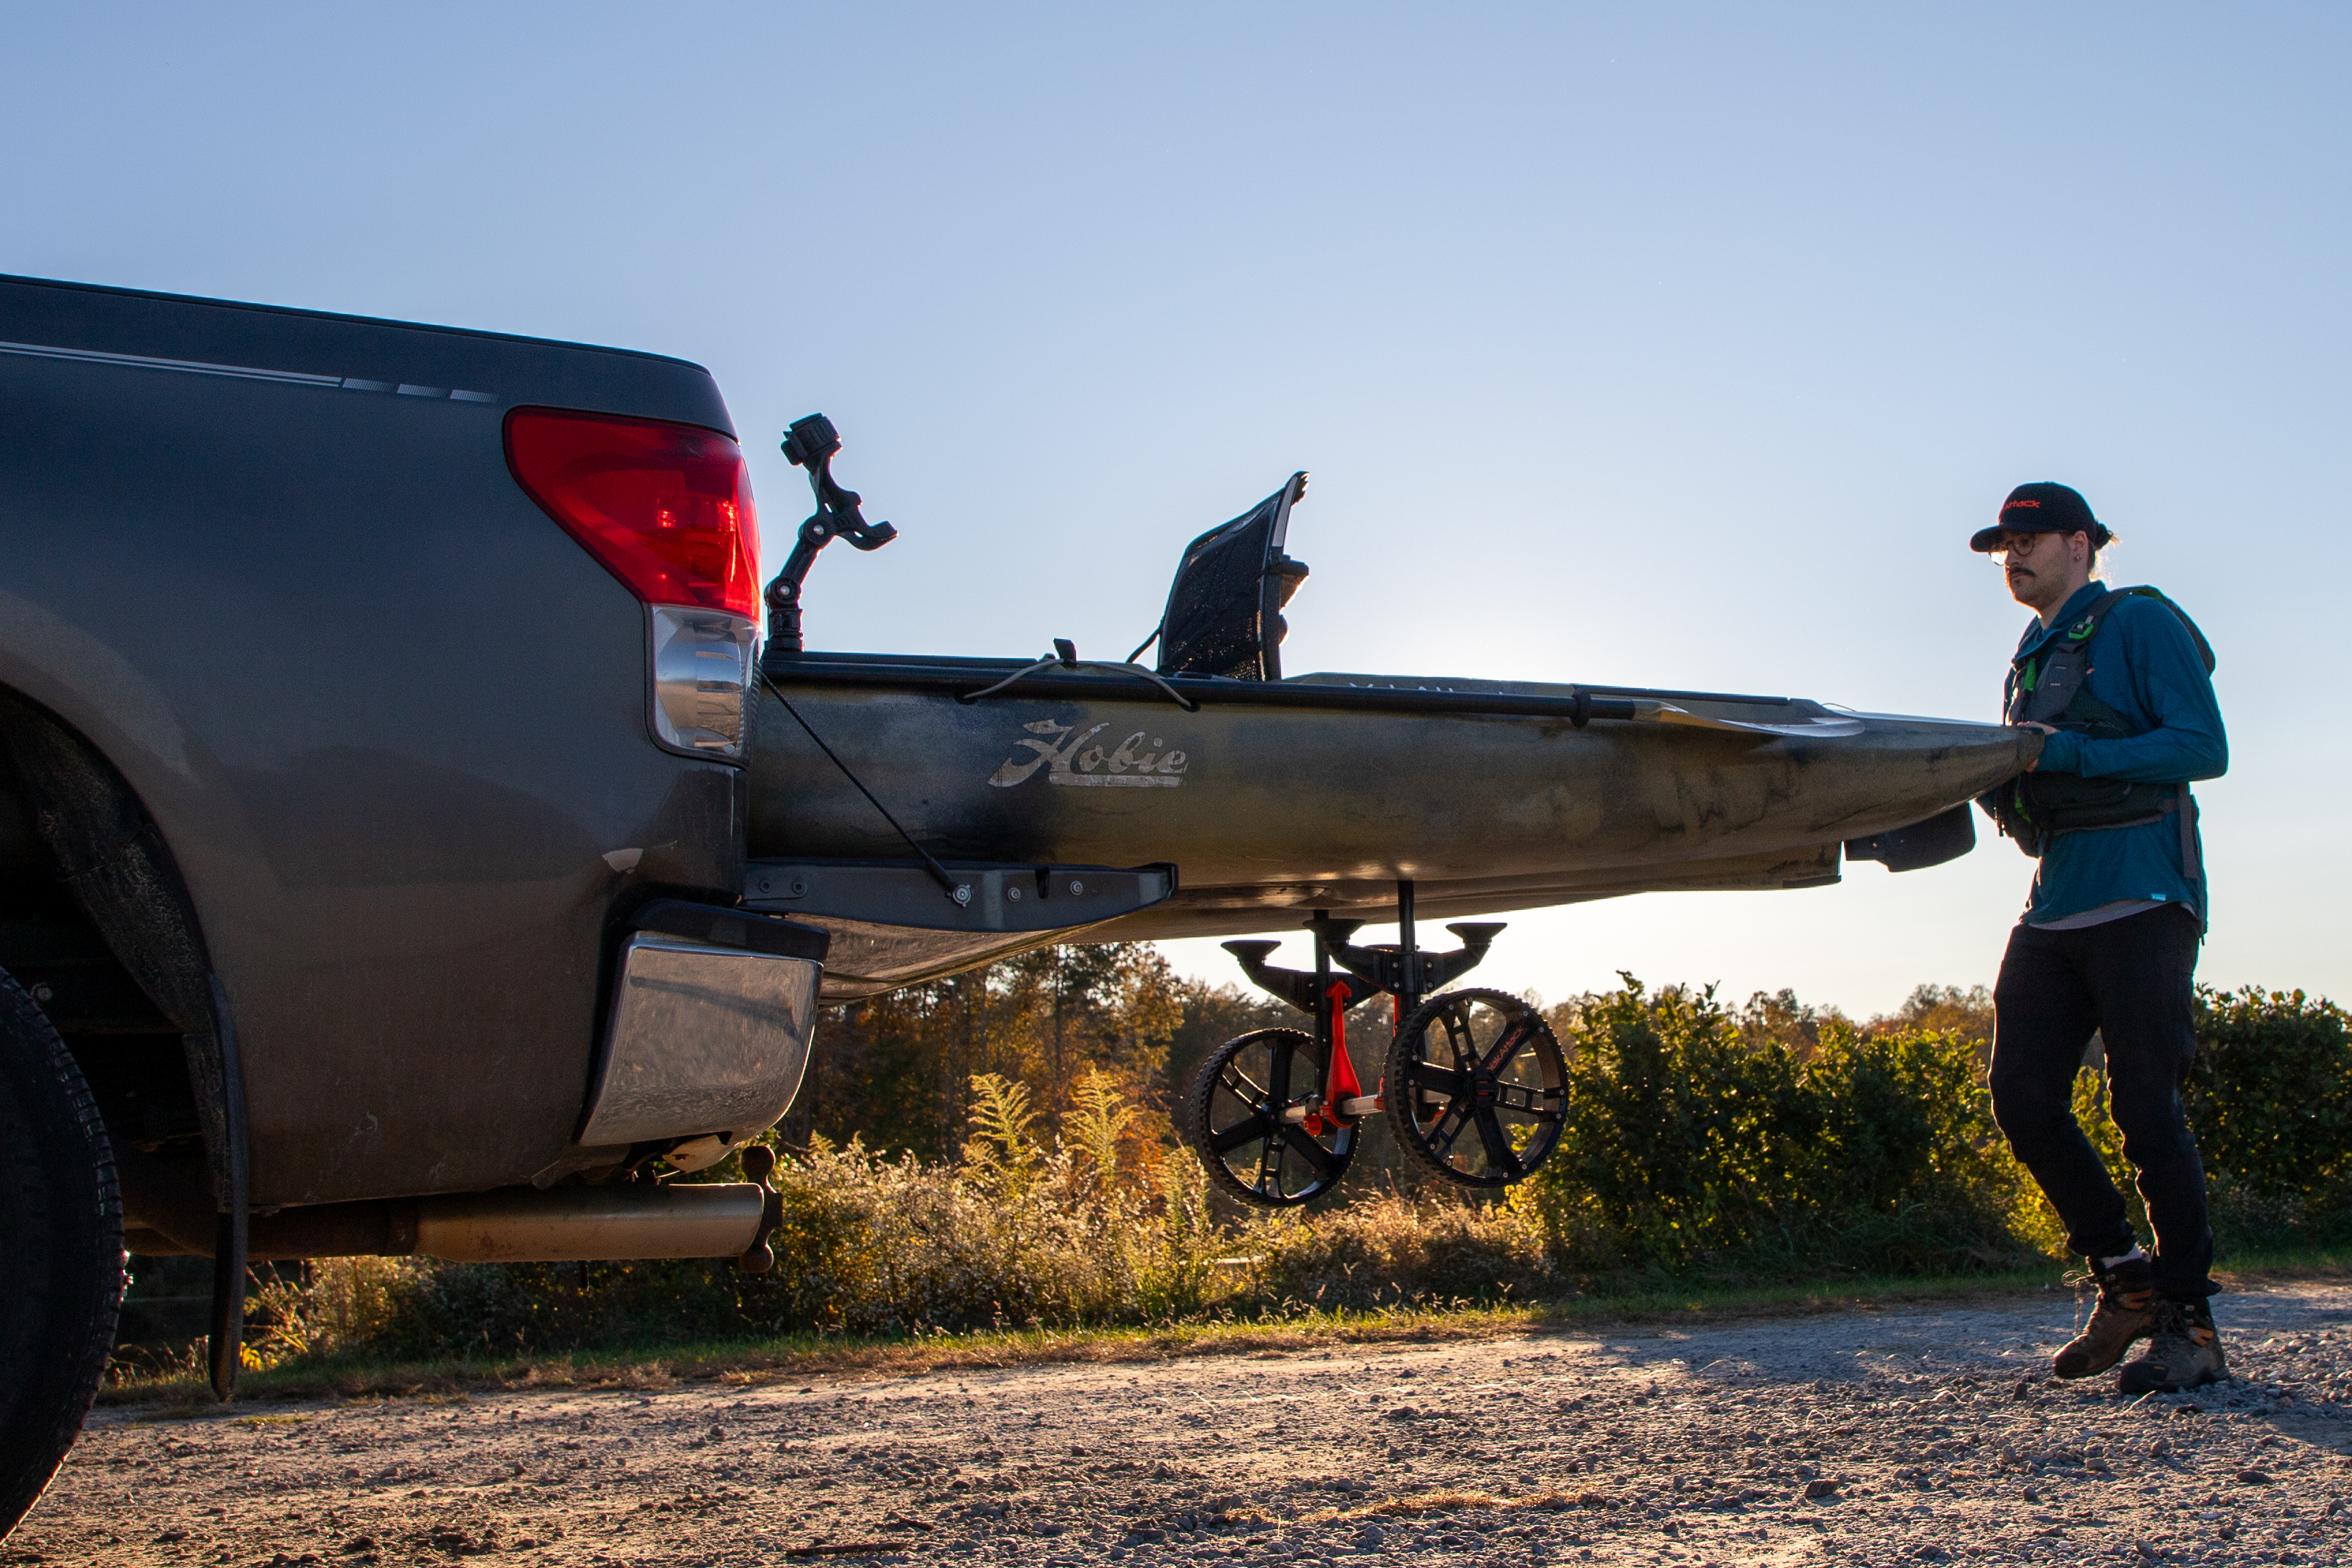 transporting a hobie kayak in a truck bed using a yakattack scupper kayak cart